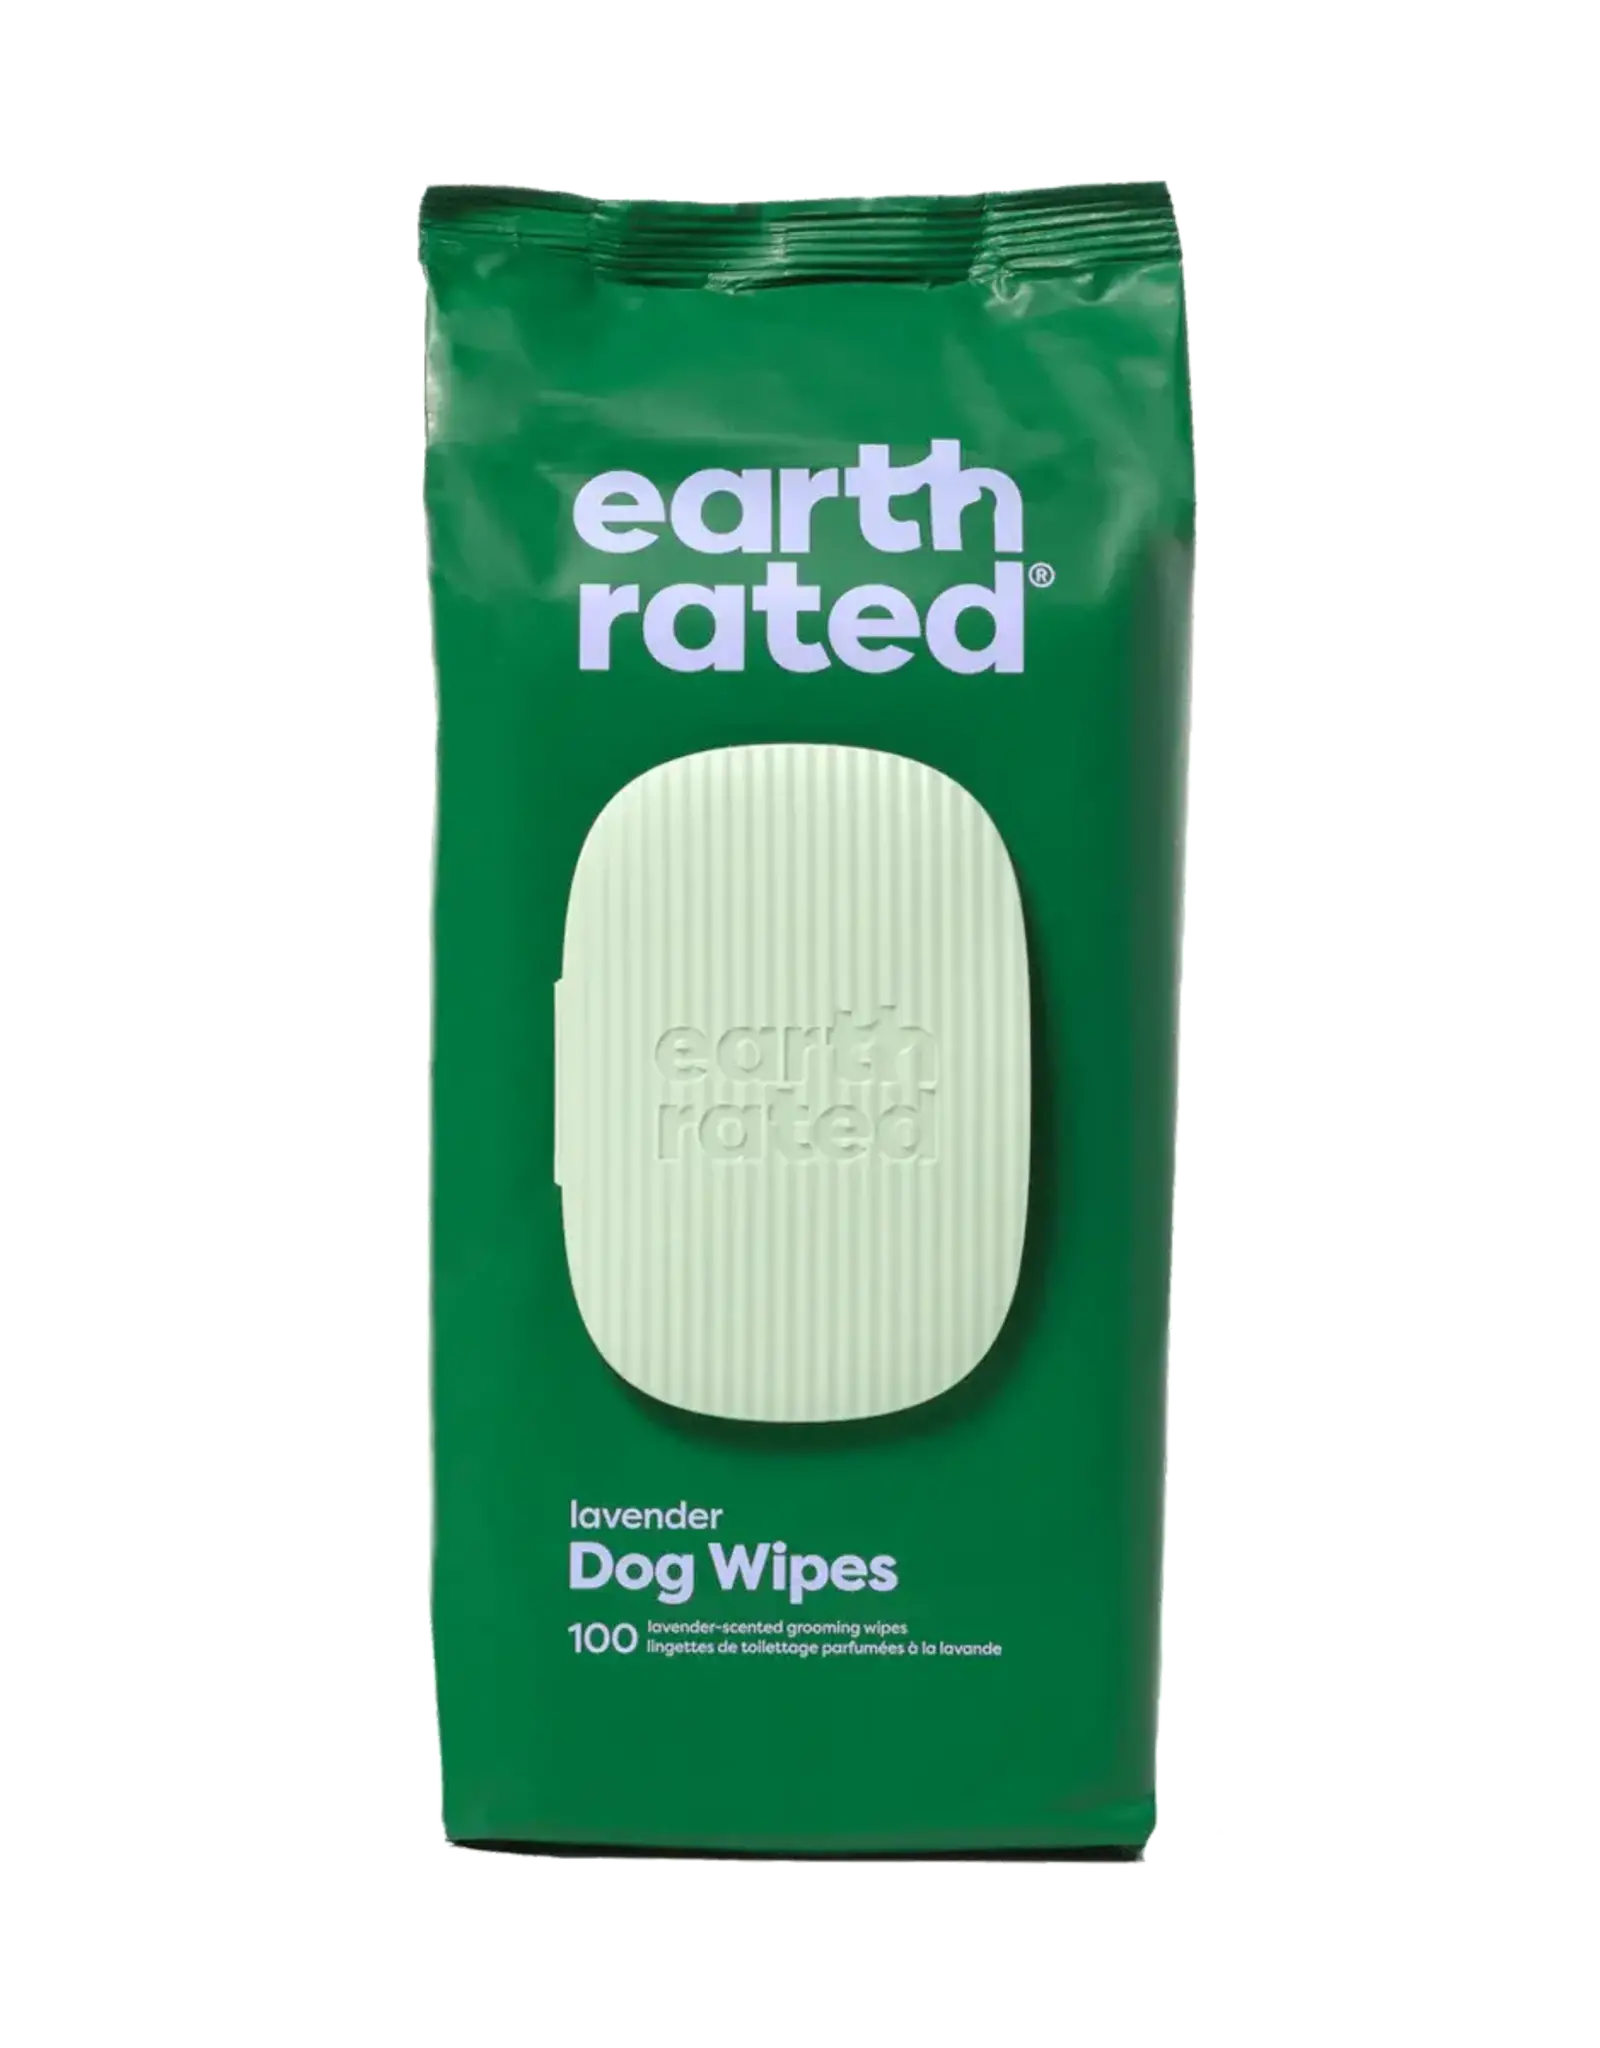 EARTH RATED EARTH RATED GROOMING WIPES LAVENDER 100CT